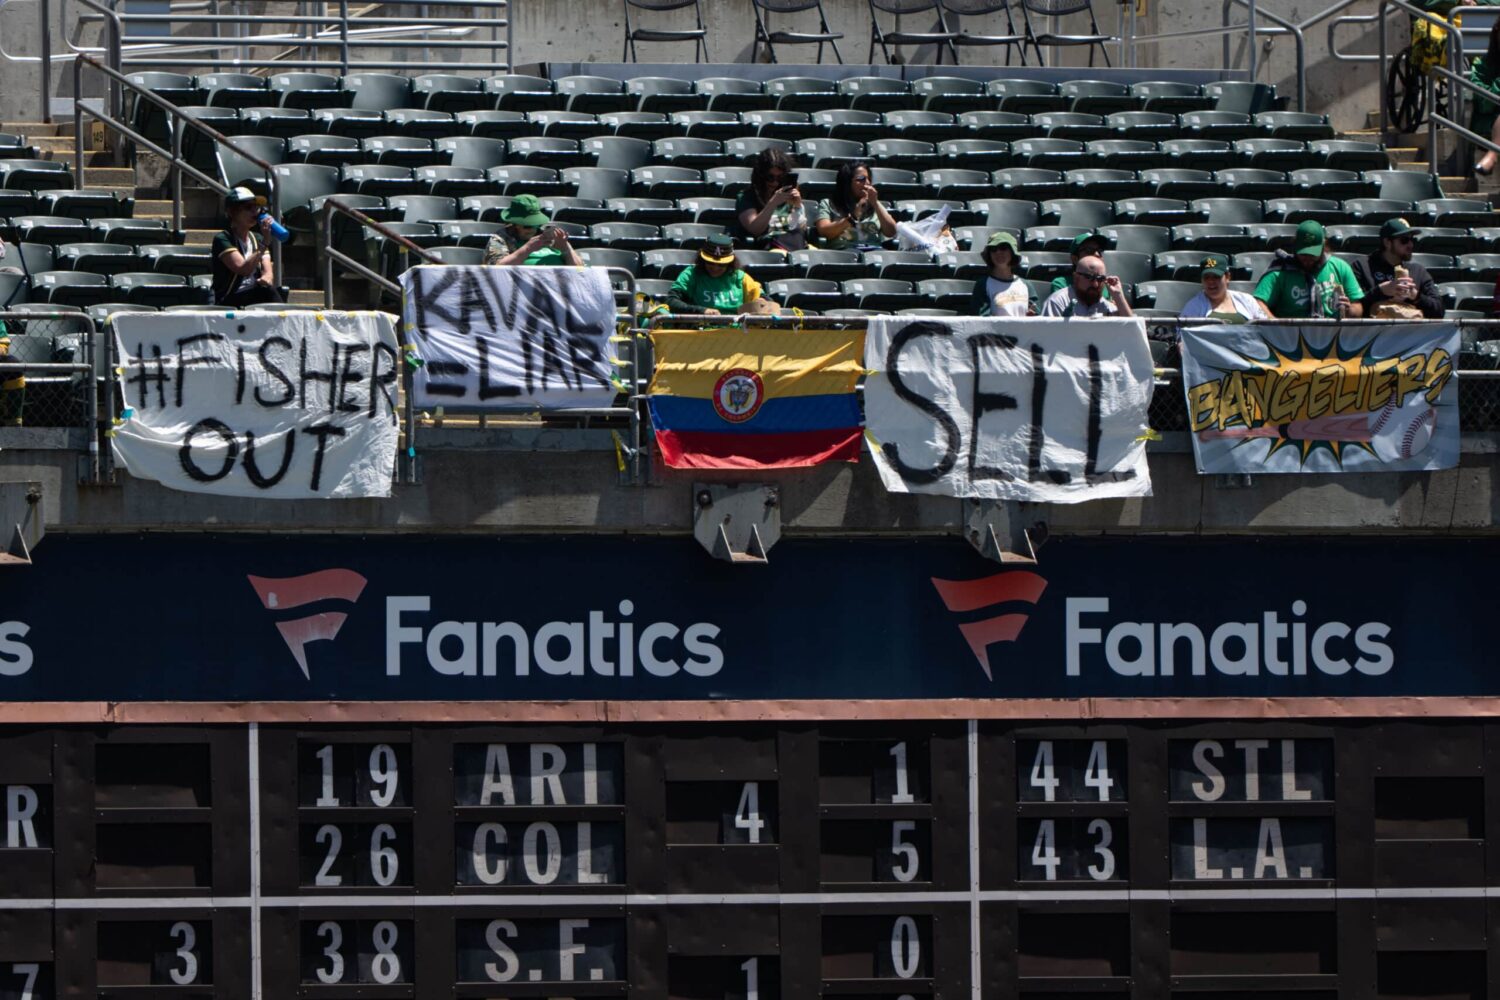 Oakland A's fans protest team leadership.